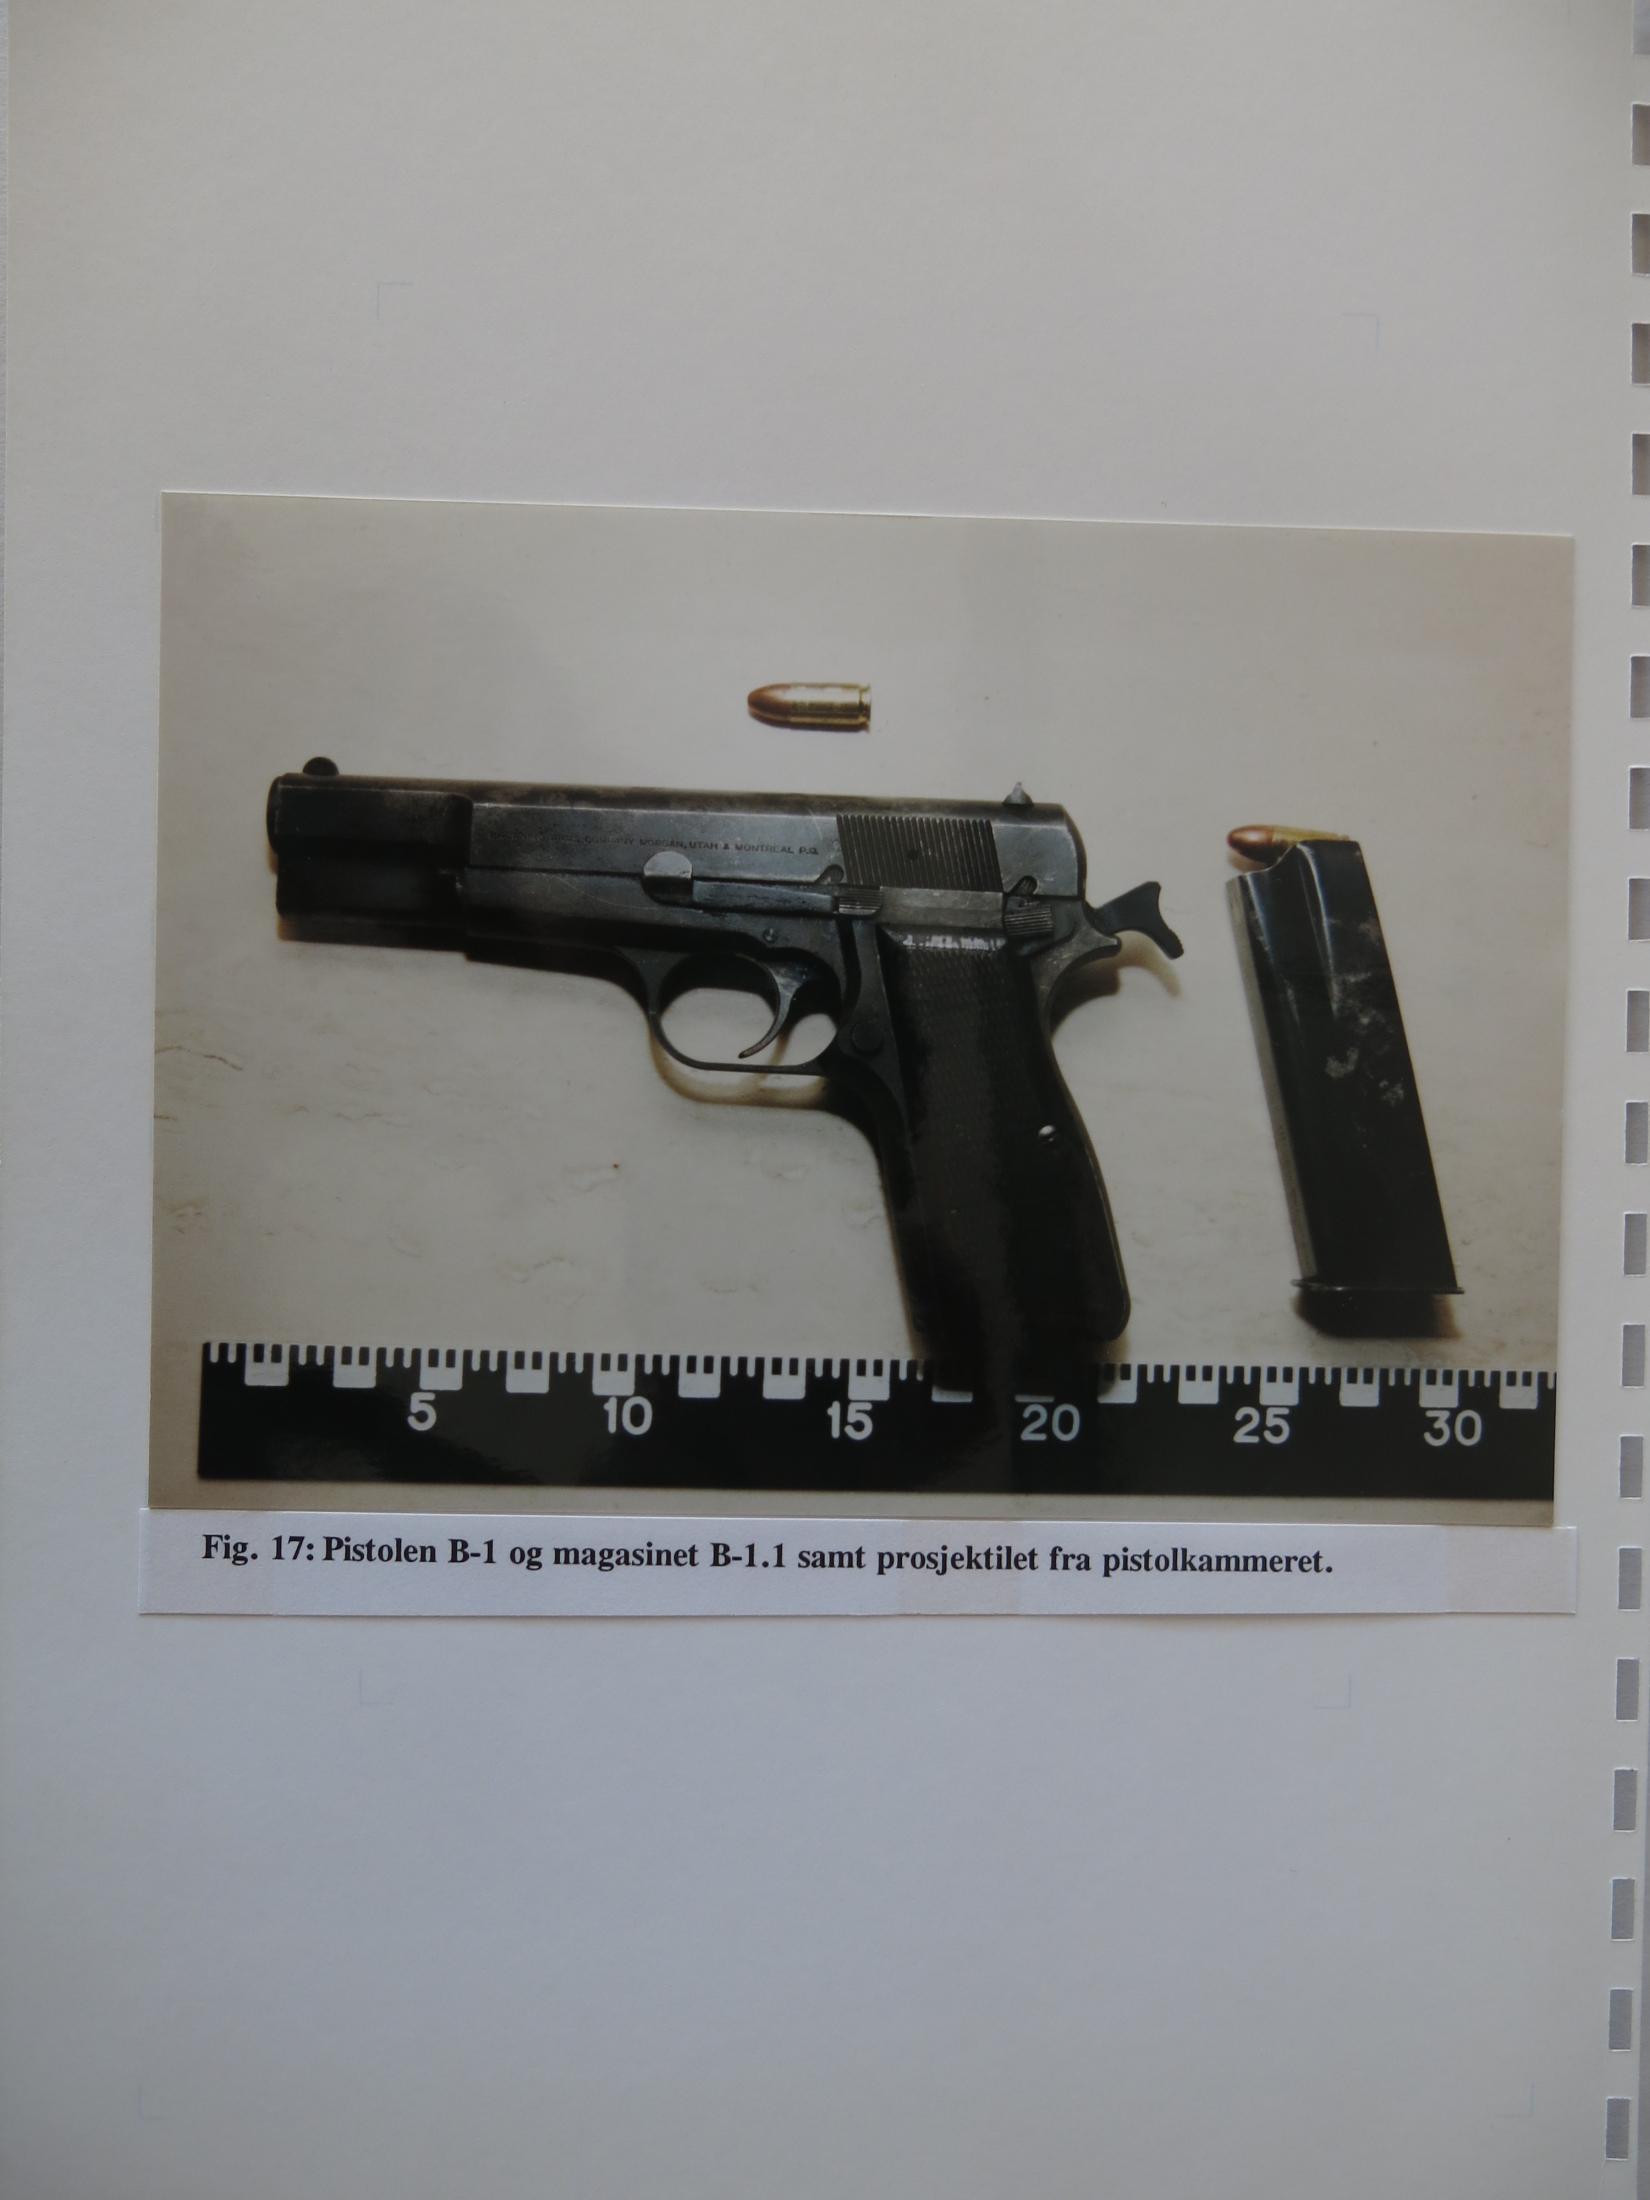 THE WEAPON: The Browning 9 mm is popular among criminals. The hammer was cocked when the weapon was found in the woman’s hand. Two shots had been fired. Another seven bullets remained in the magazine. Photo: POLICE.